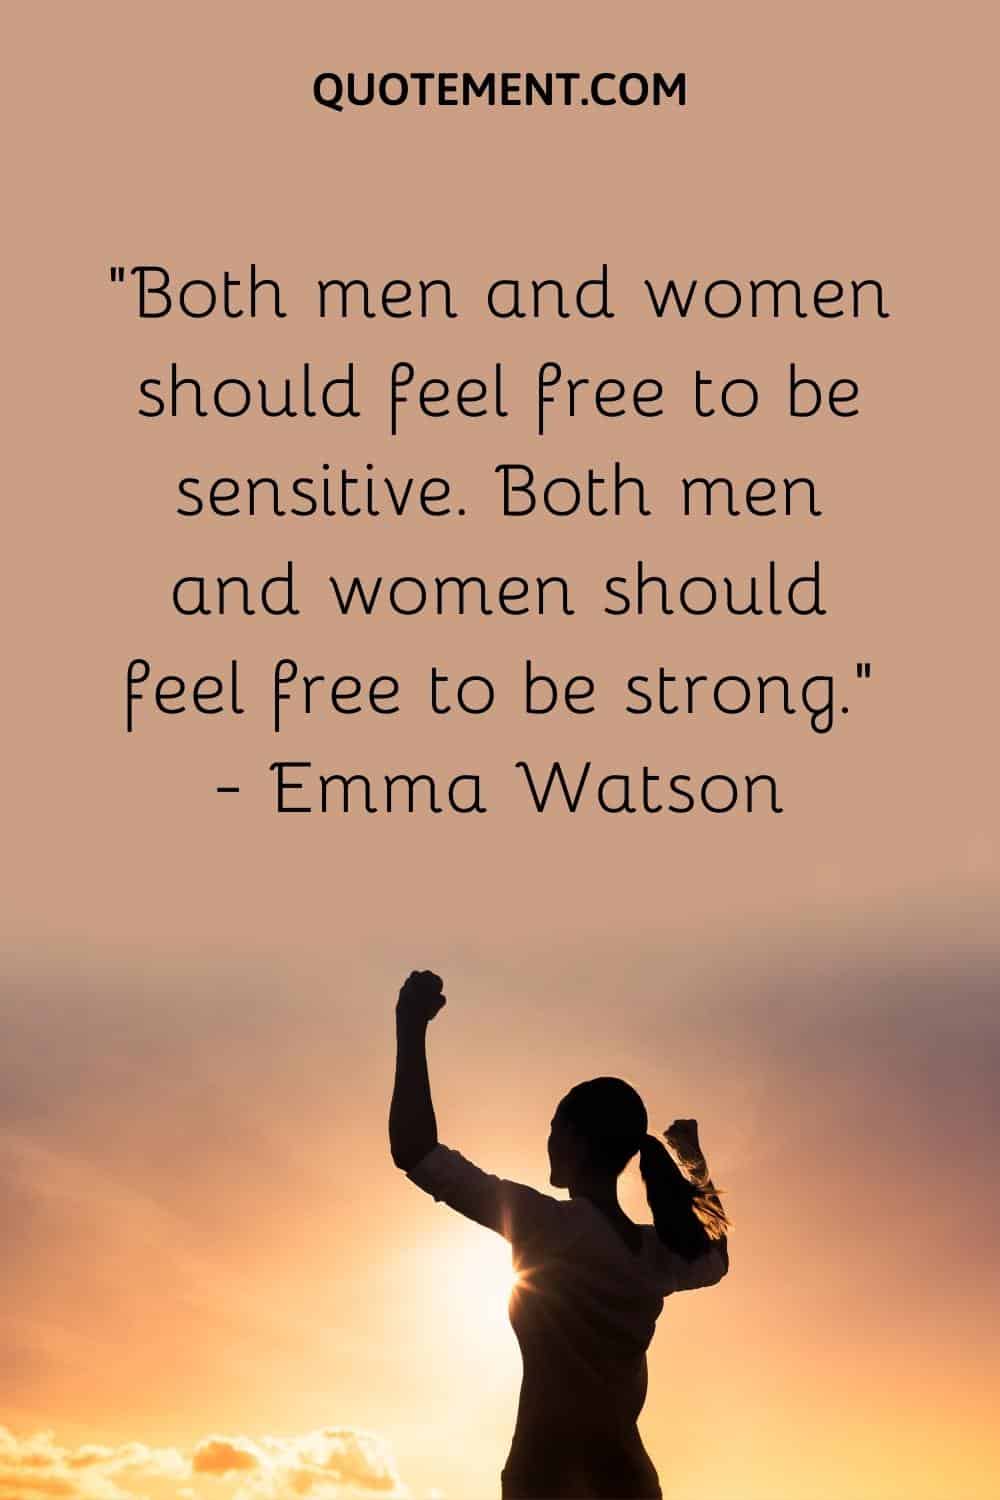 Both men and women should feel free to be sensitive